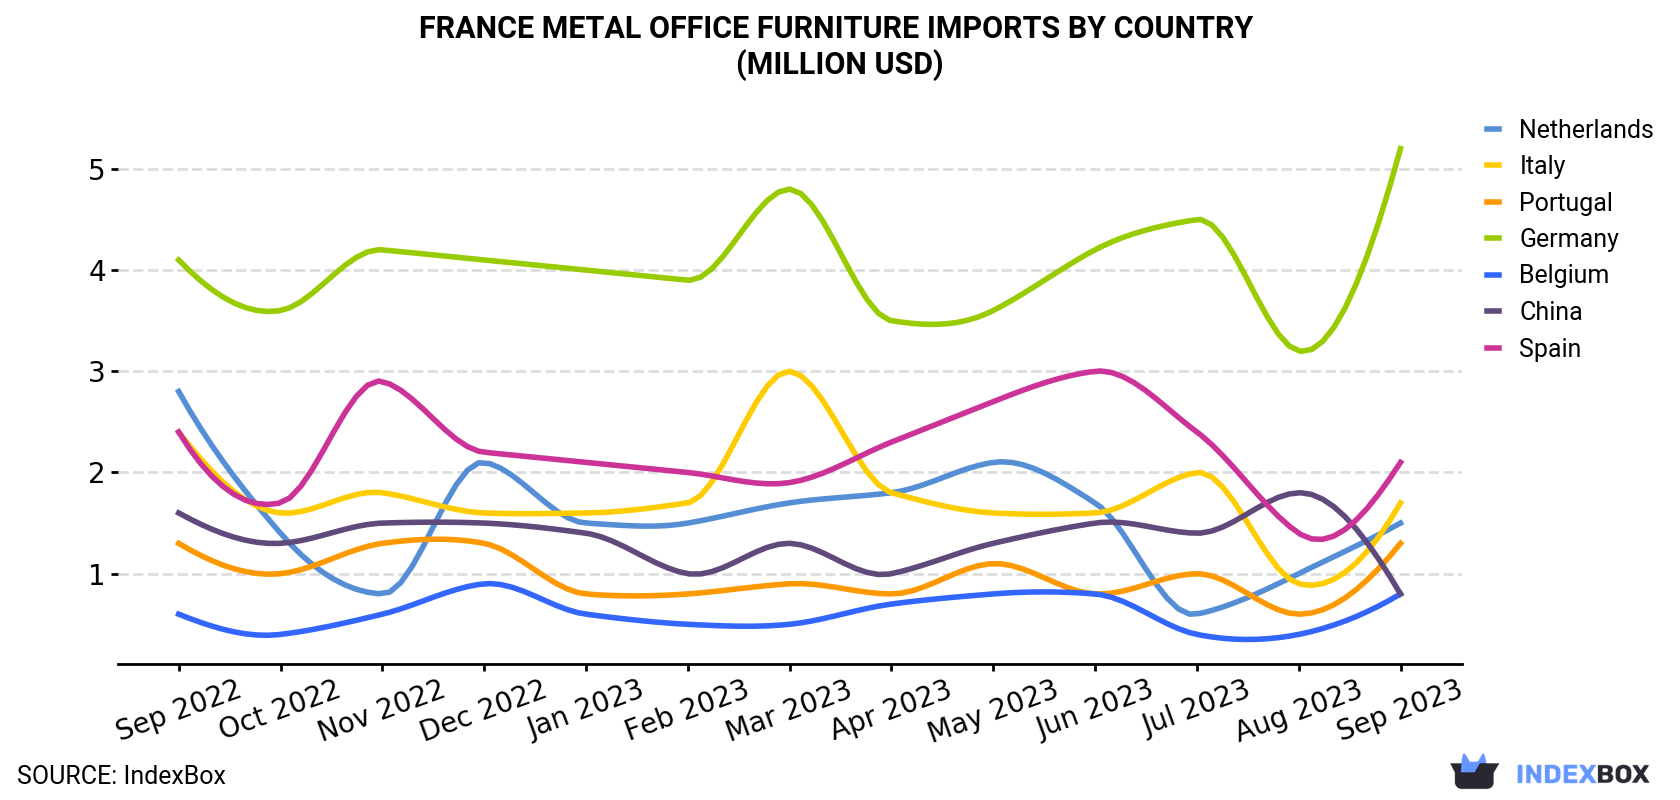 France Metal Office Furniture Imports By Country (Million USD)